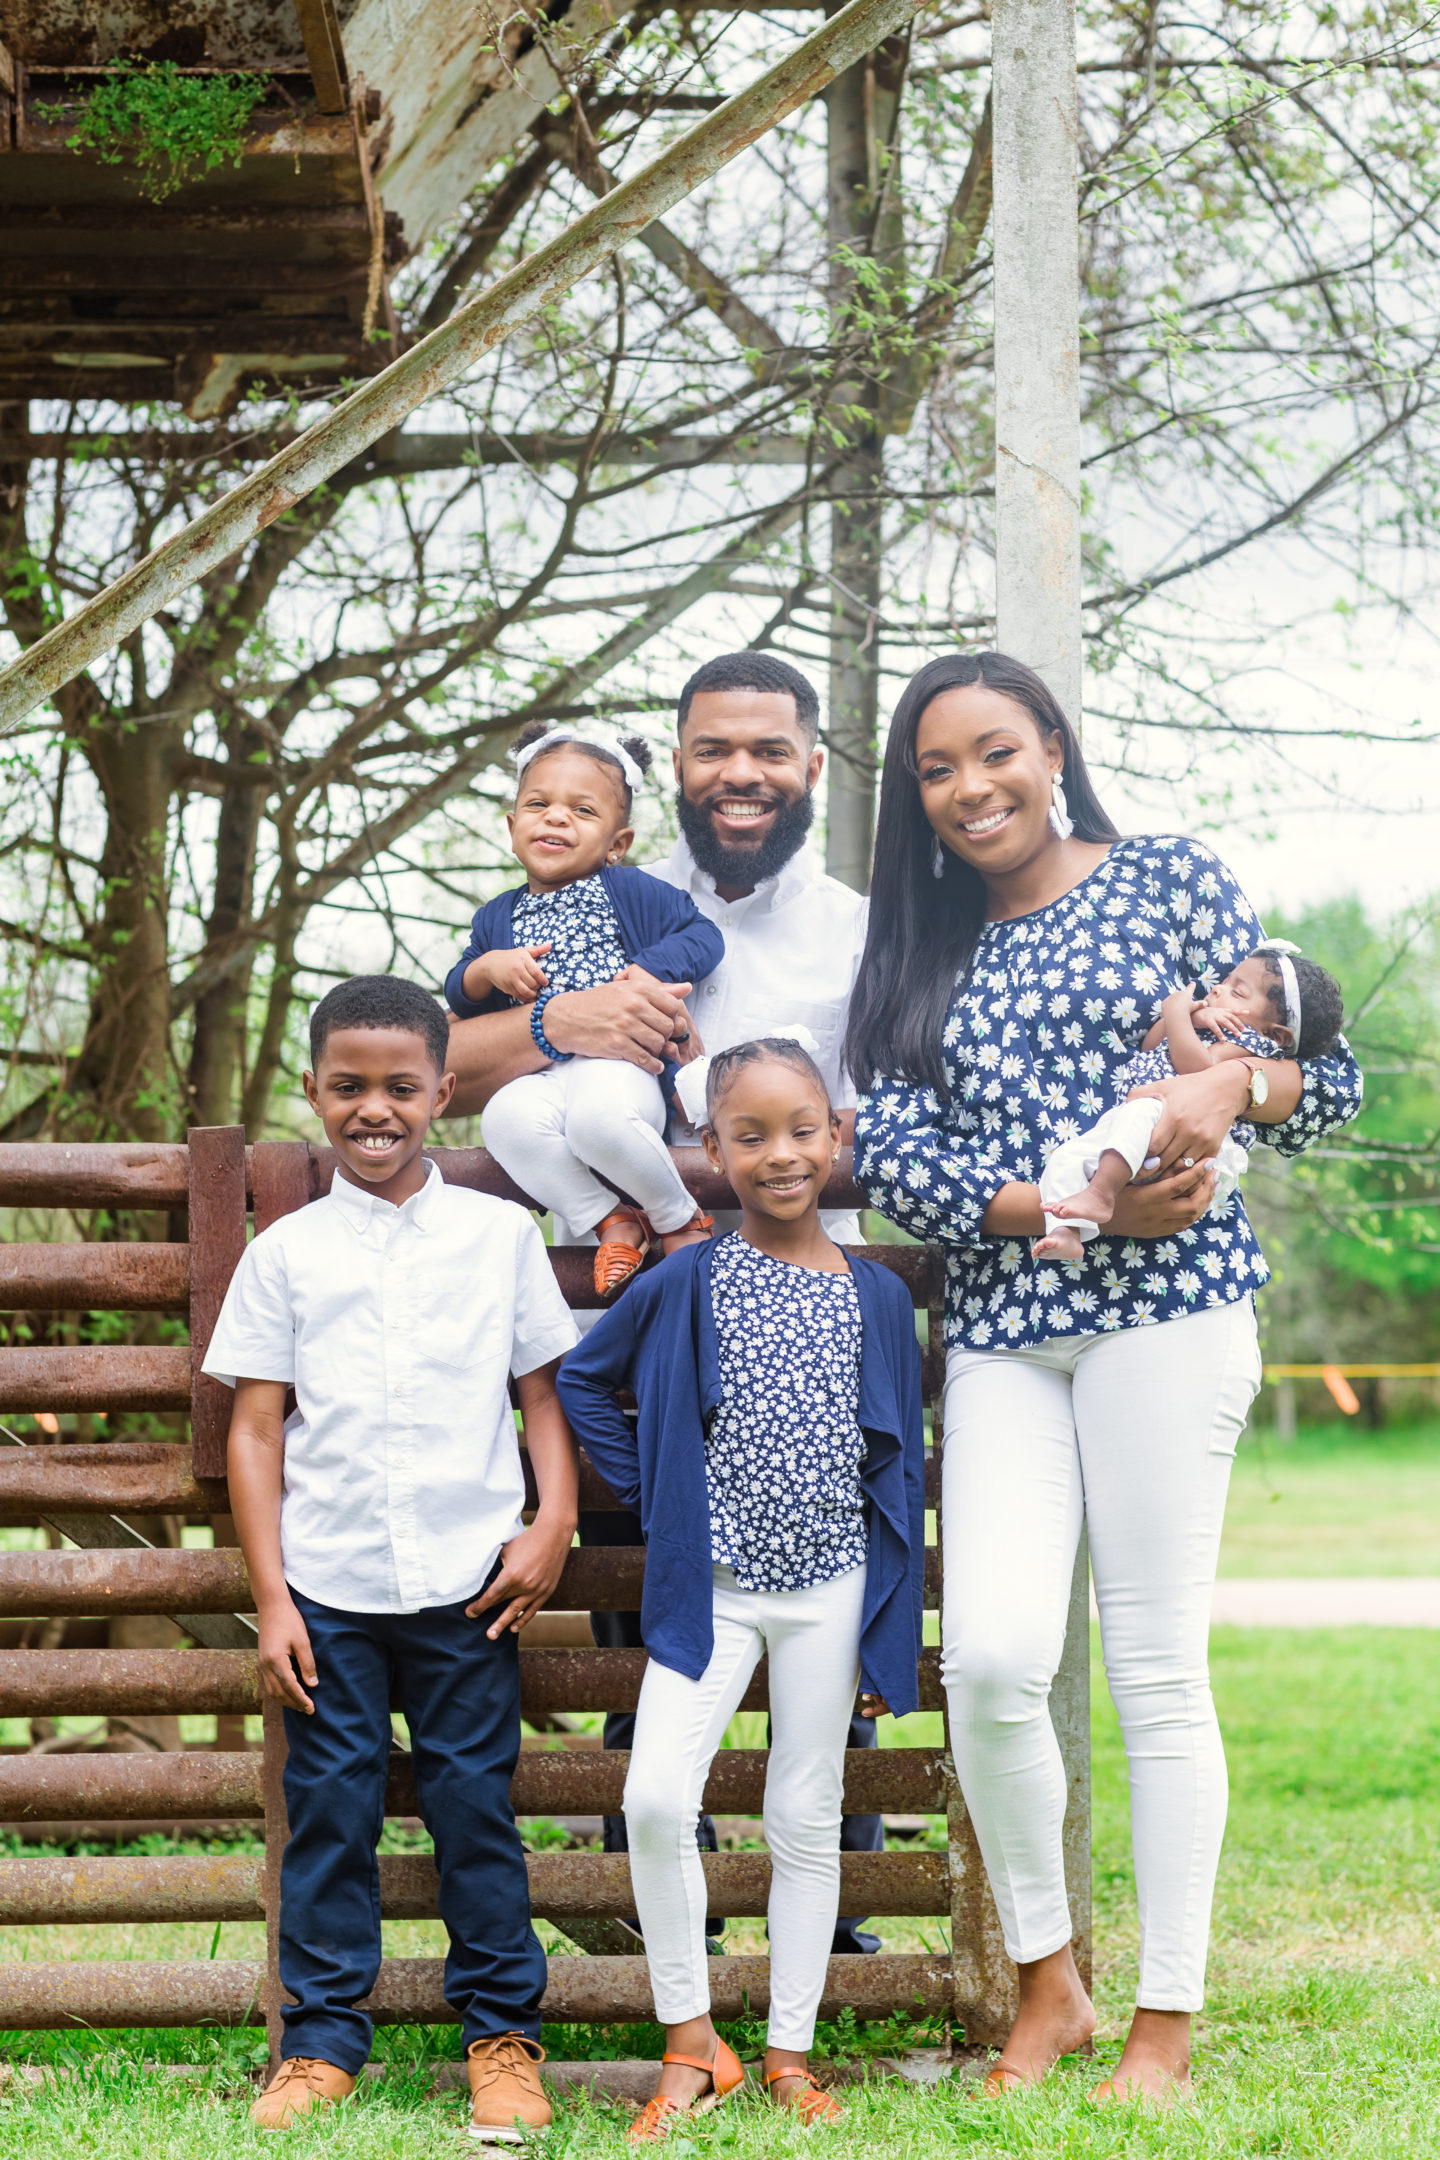 How we Navigate our Beautifully Blended Family